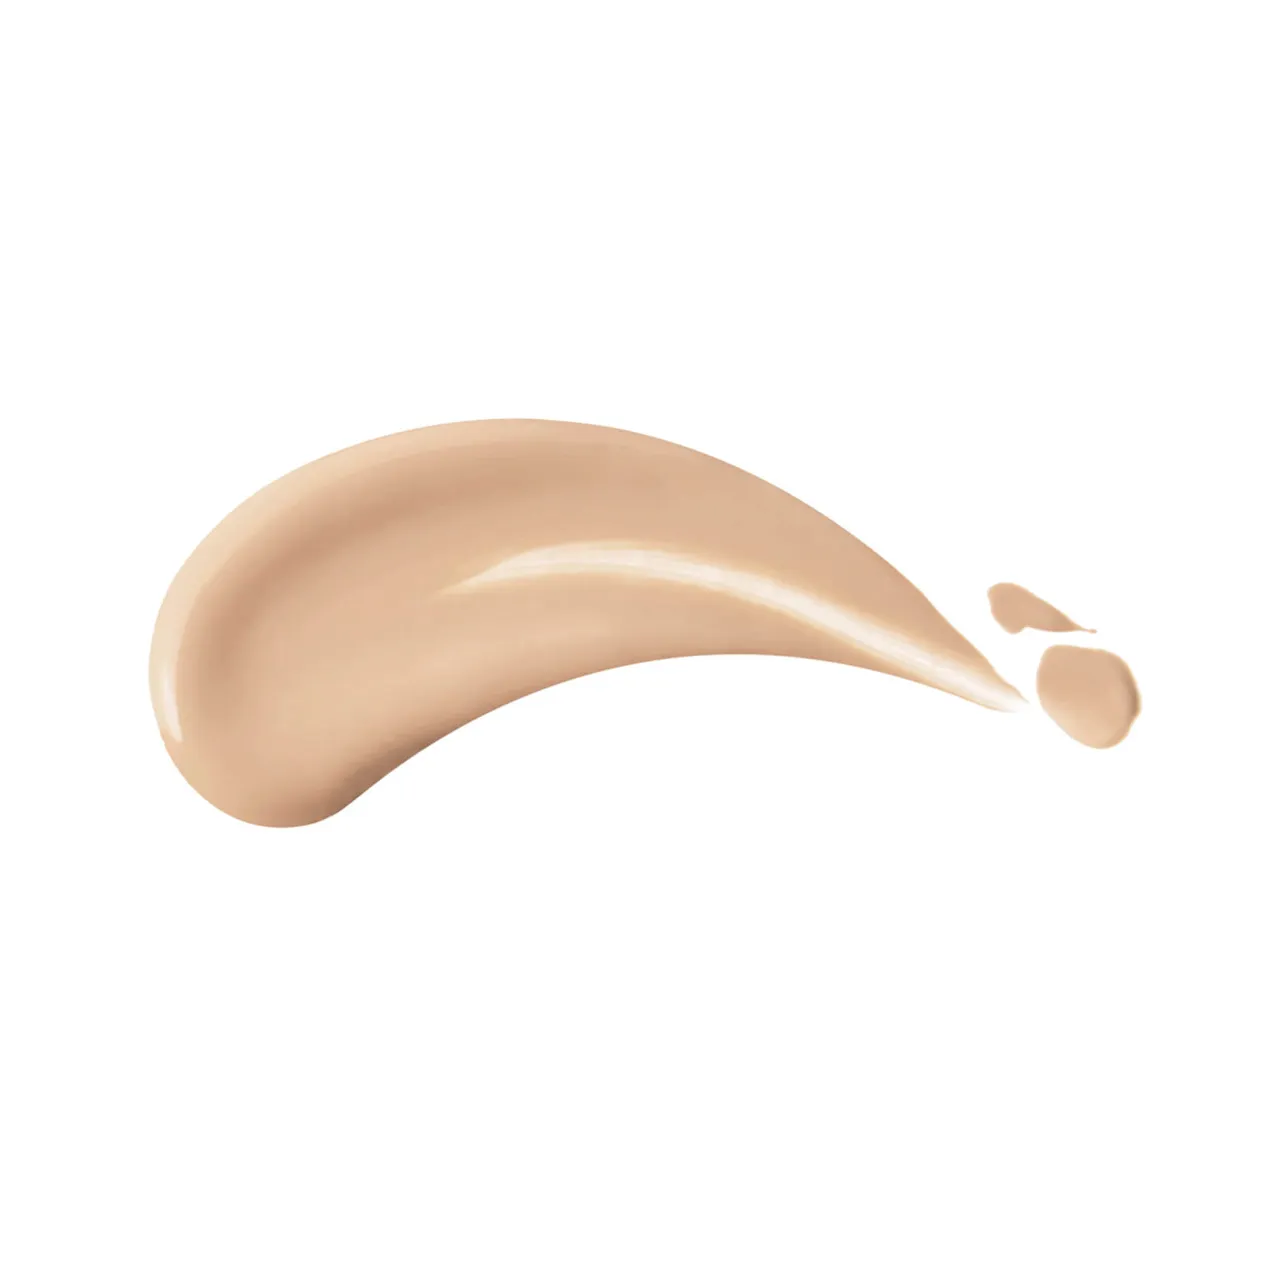 Shiseido Revitalessence Glow Foundation Exclusive 30ml (Various Shades) - 260 Cashmere